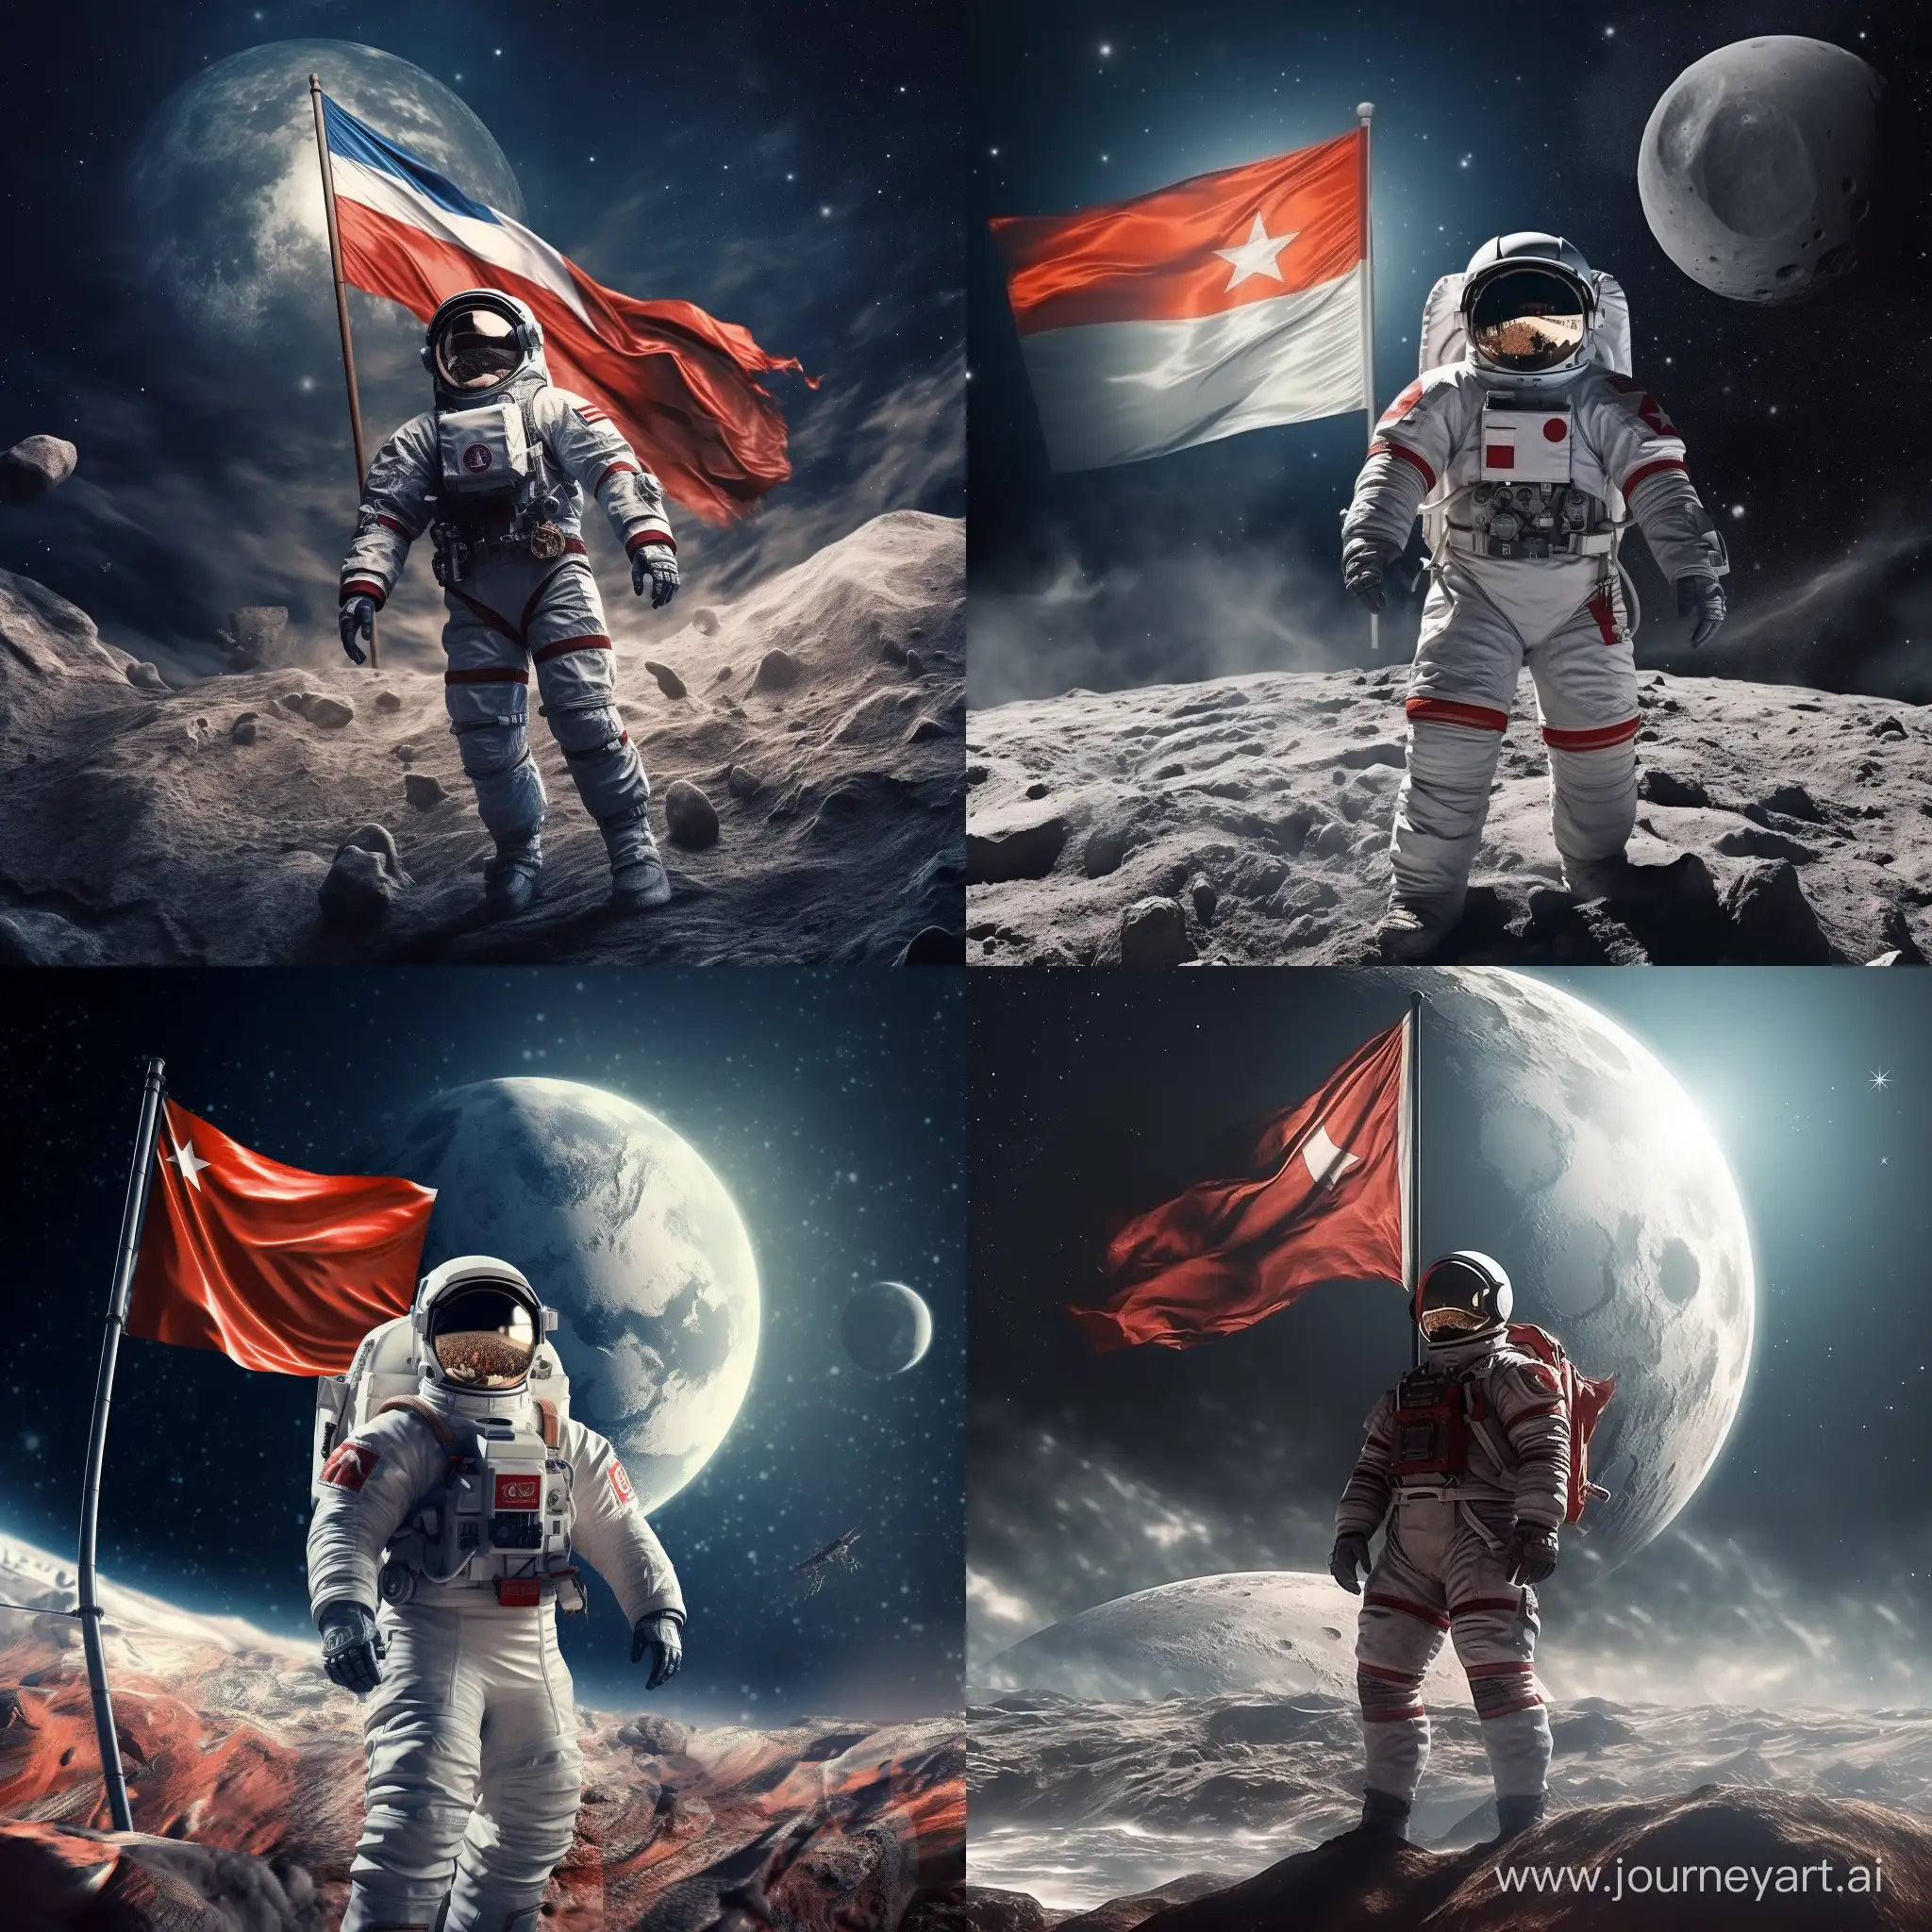 Russian-Cosmonaut-Waving-Flag-on-the-Moon-Amidst-Stars-and-Rockets-3D-Space-Exploration